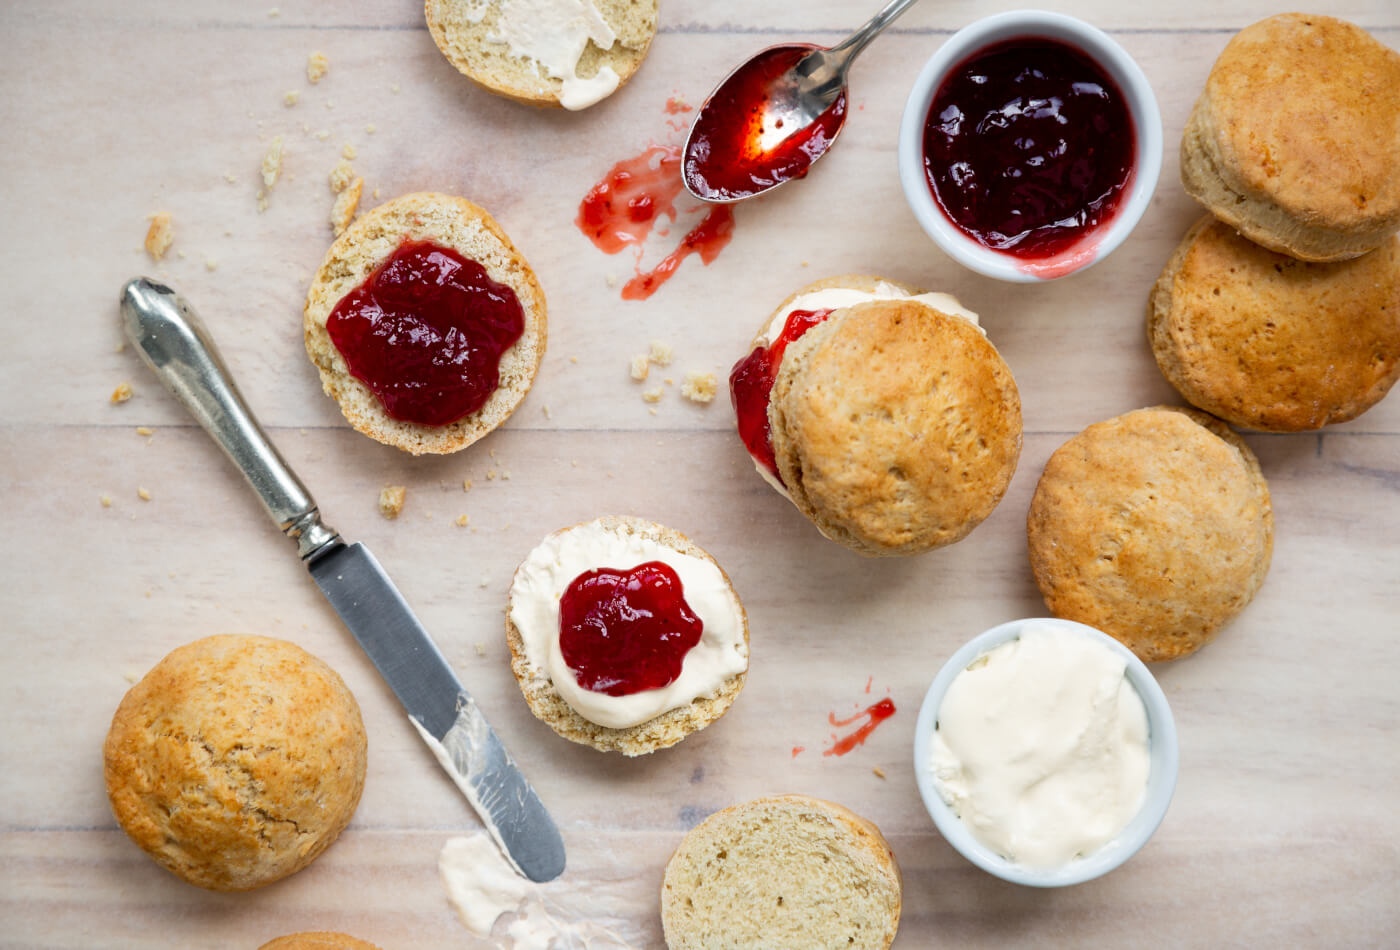 View of traditional British scones